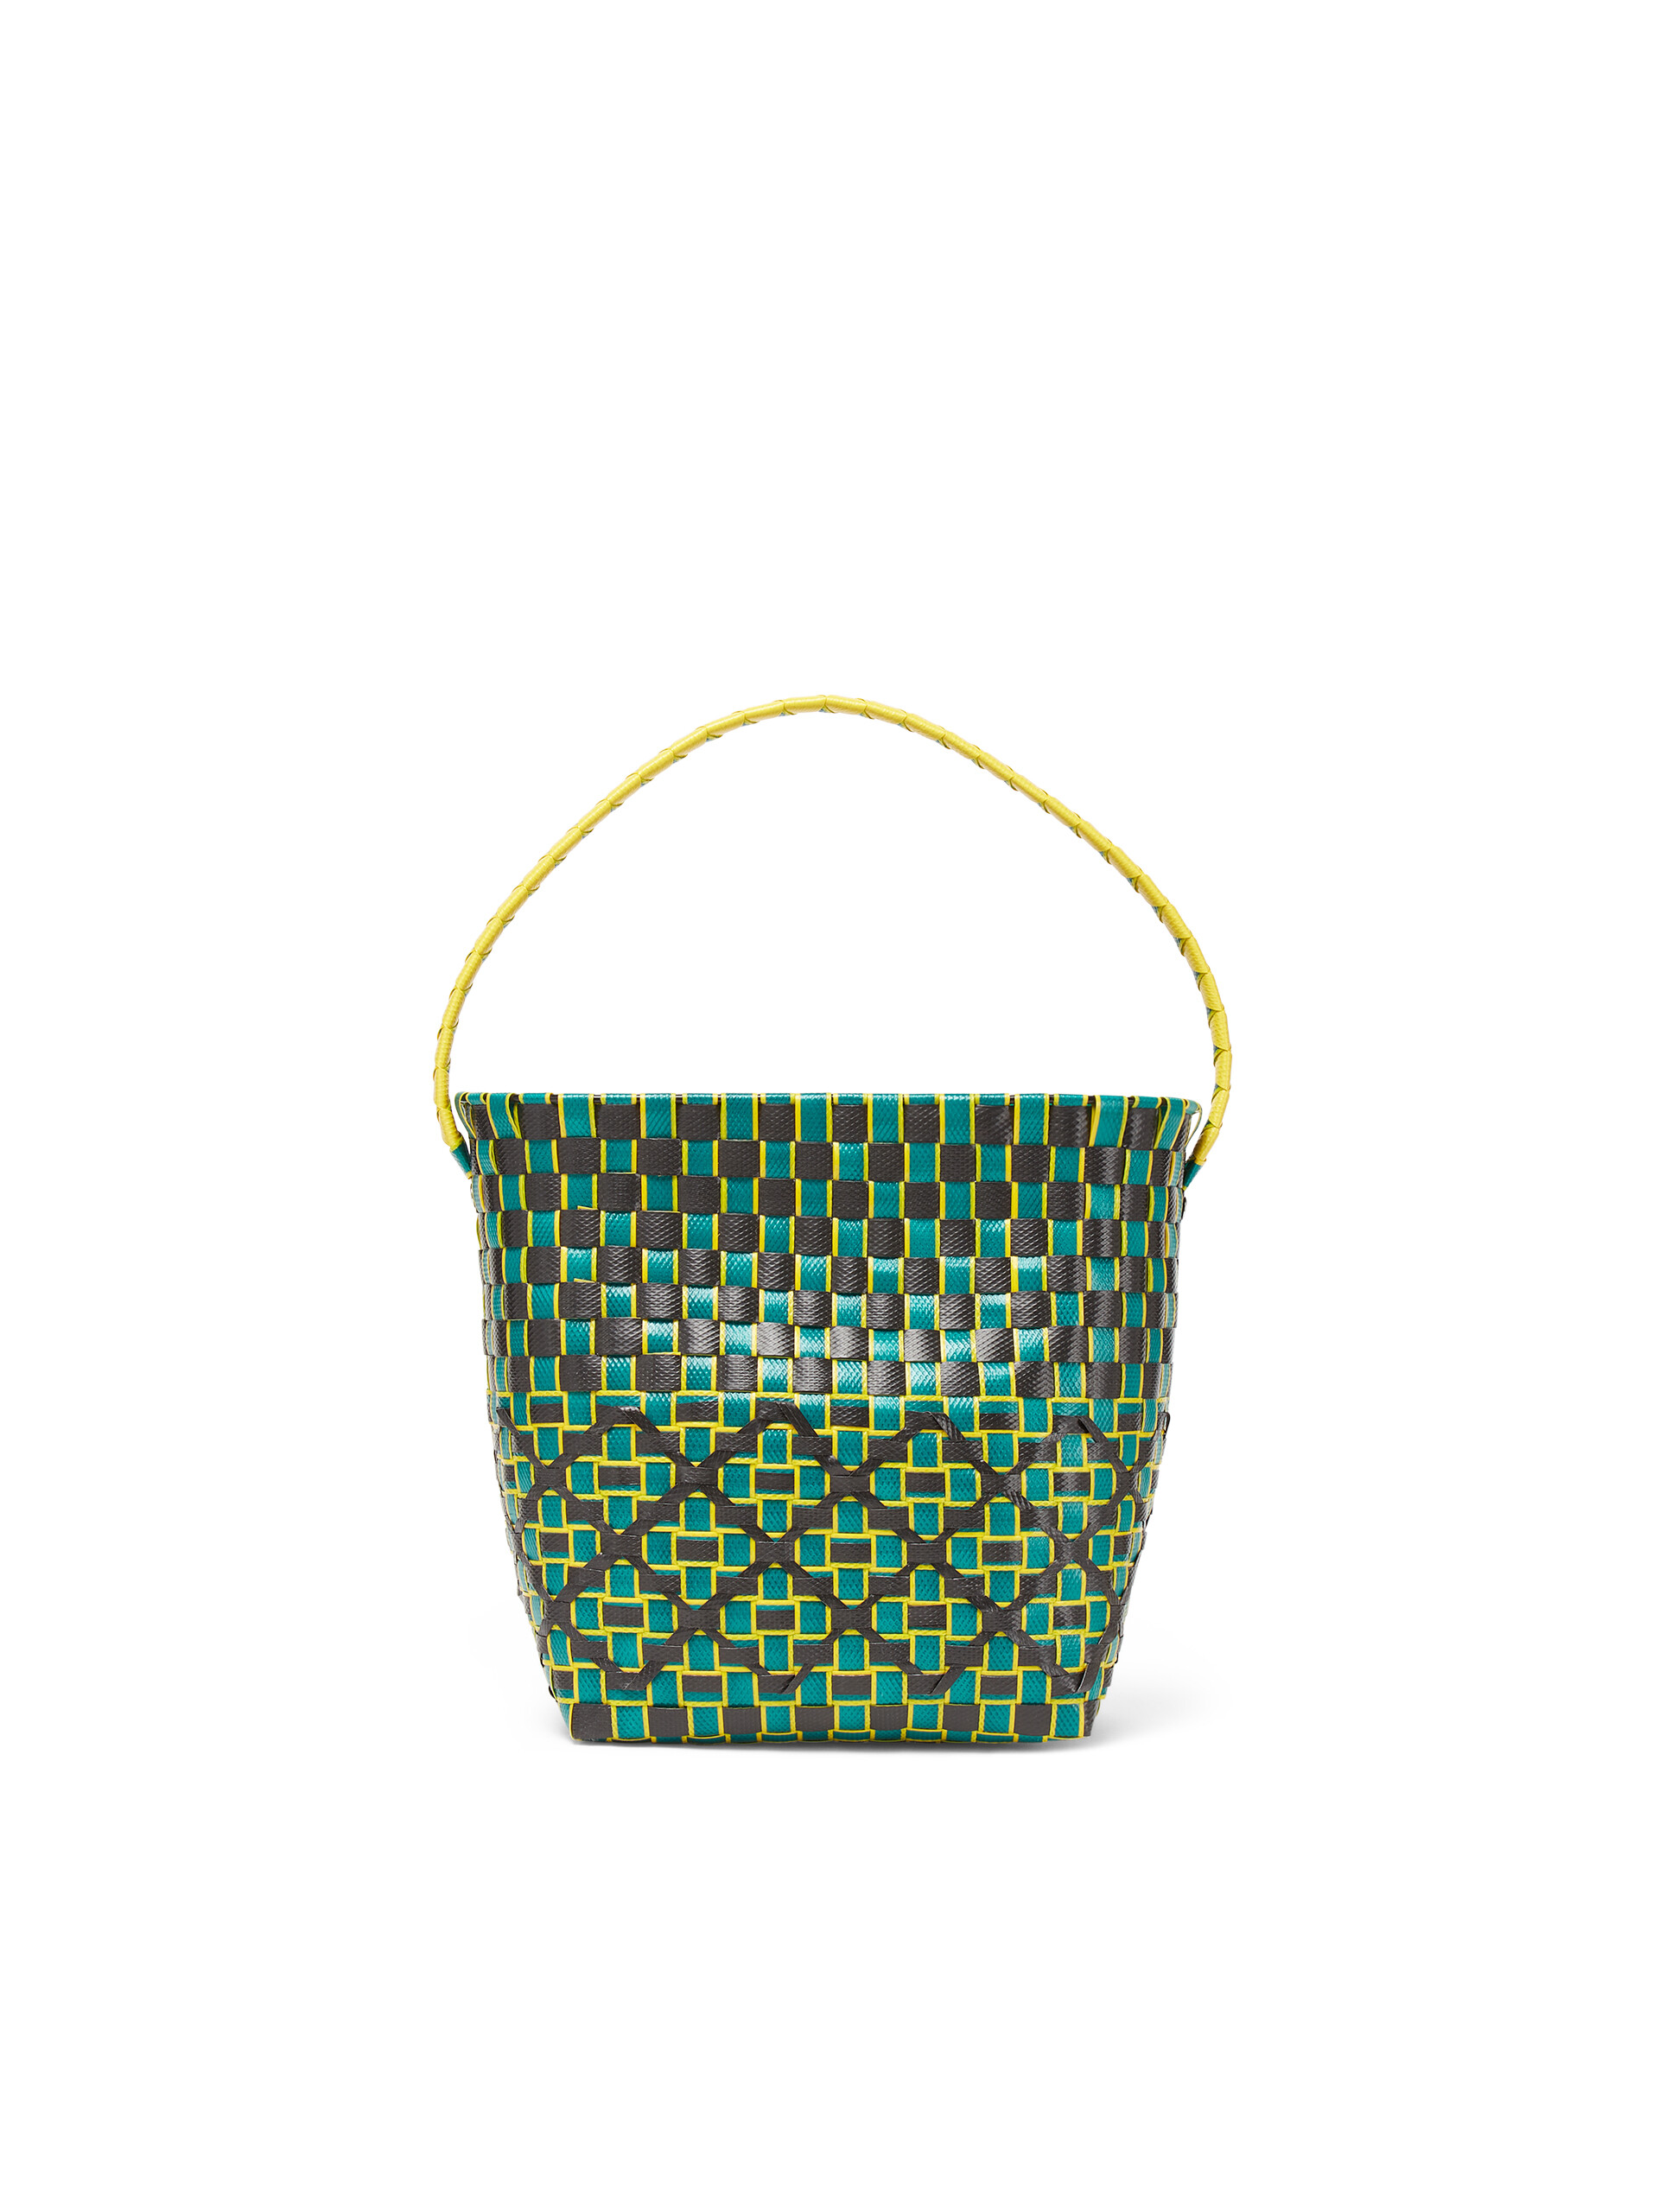 MARNI MARKET OVAL BASKET bag in orange and black woven material - Shopping Bags - Image 3